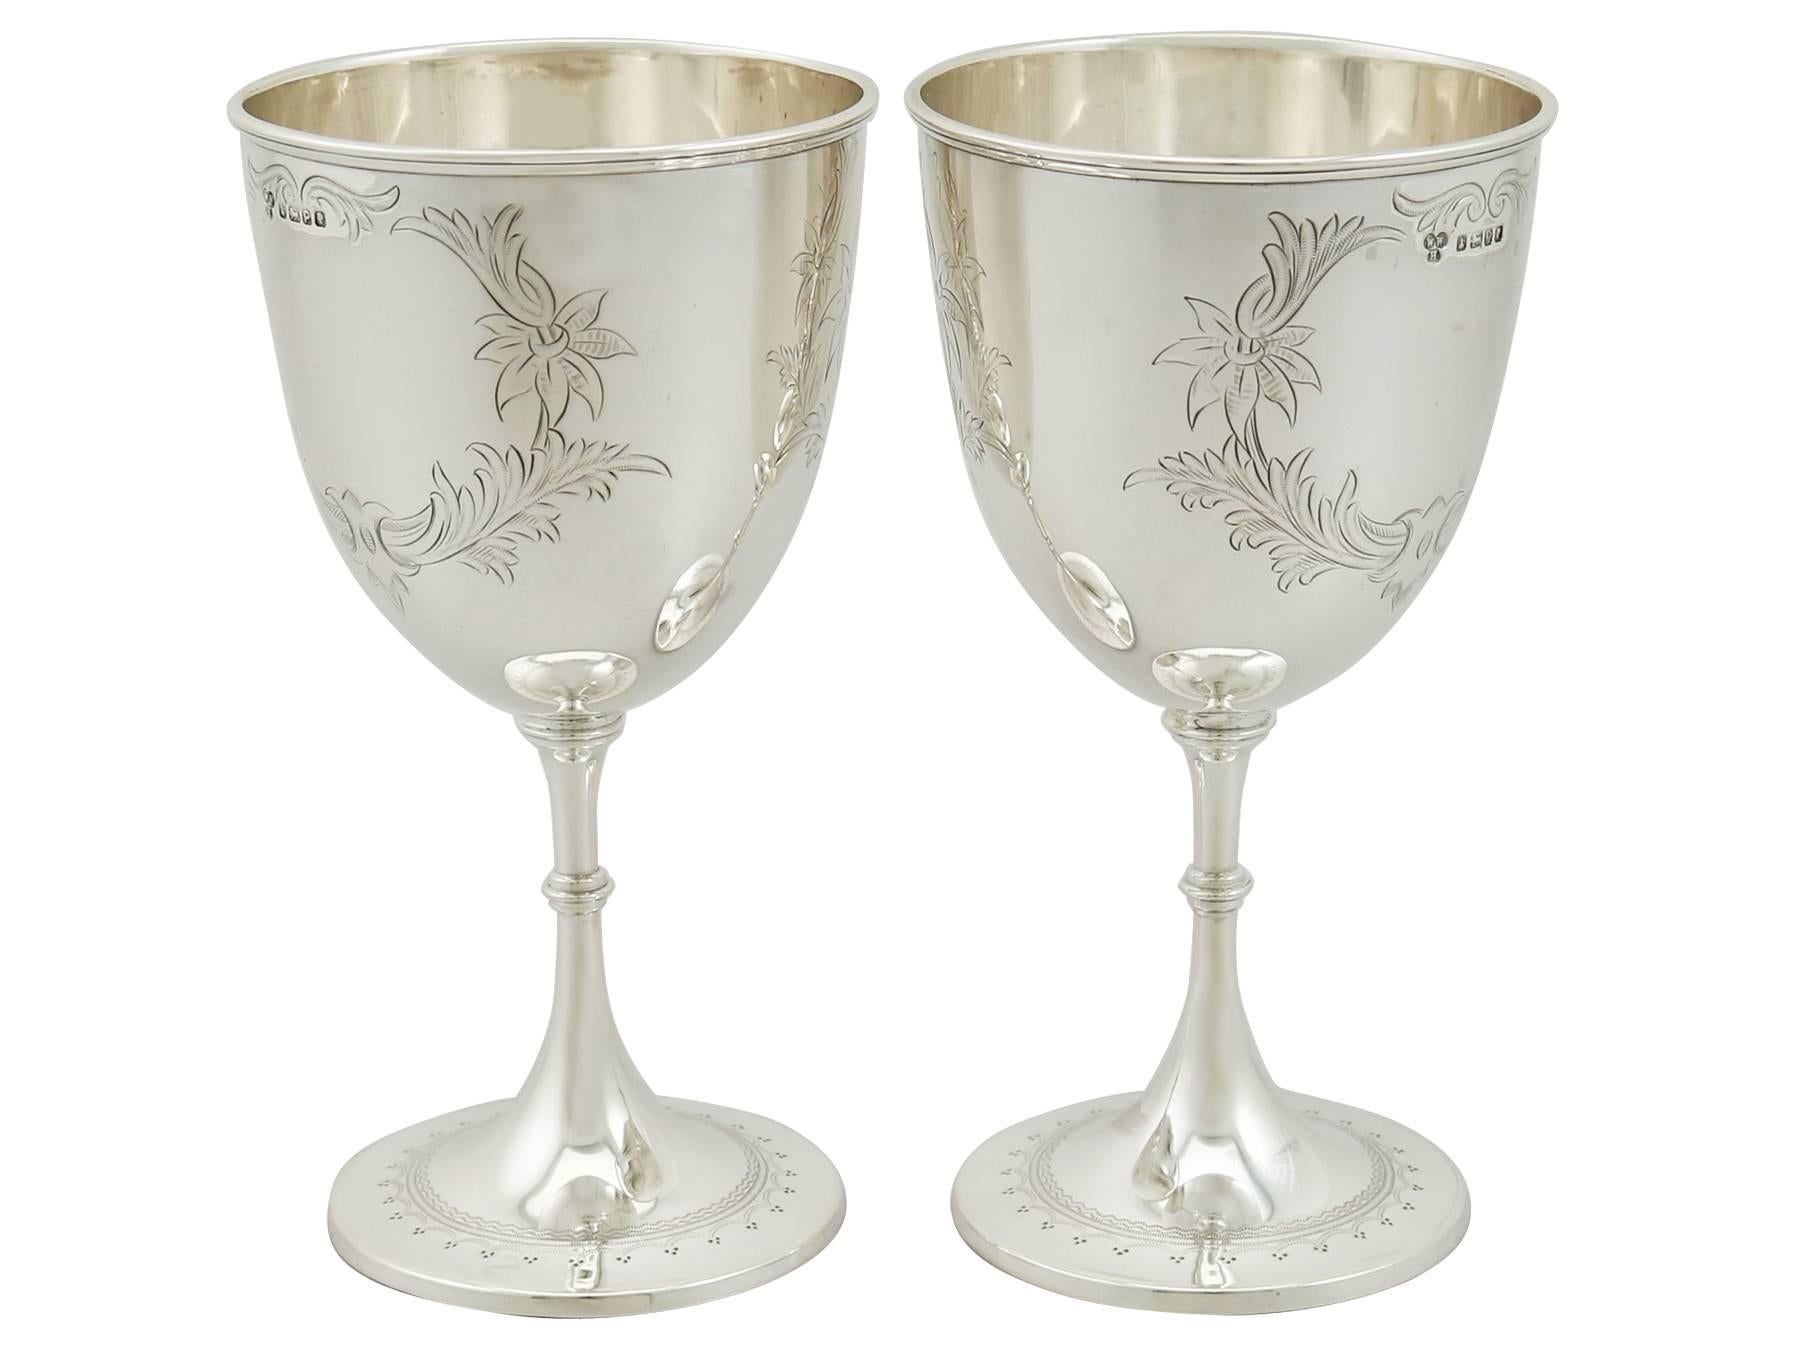 An exceptional, fine and impressive pair of antique Victorian English sterling silver goblets; an addition to our range of wine and drink related silverware.

These fine antique Victorian sterling silver drinking goblets have a plain circular bell